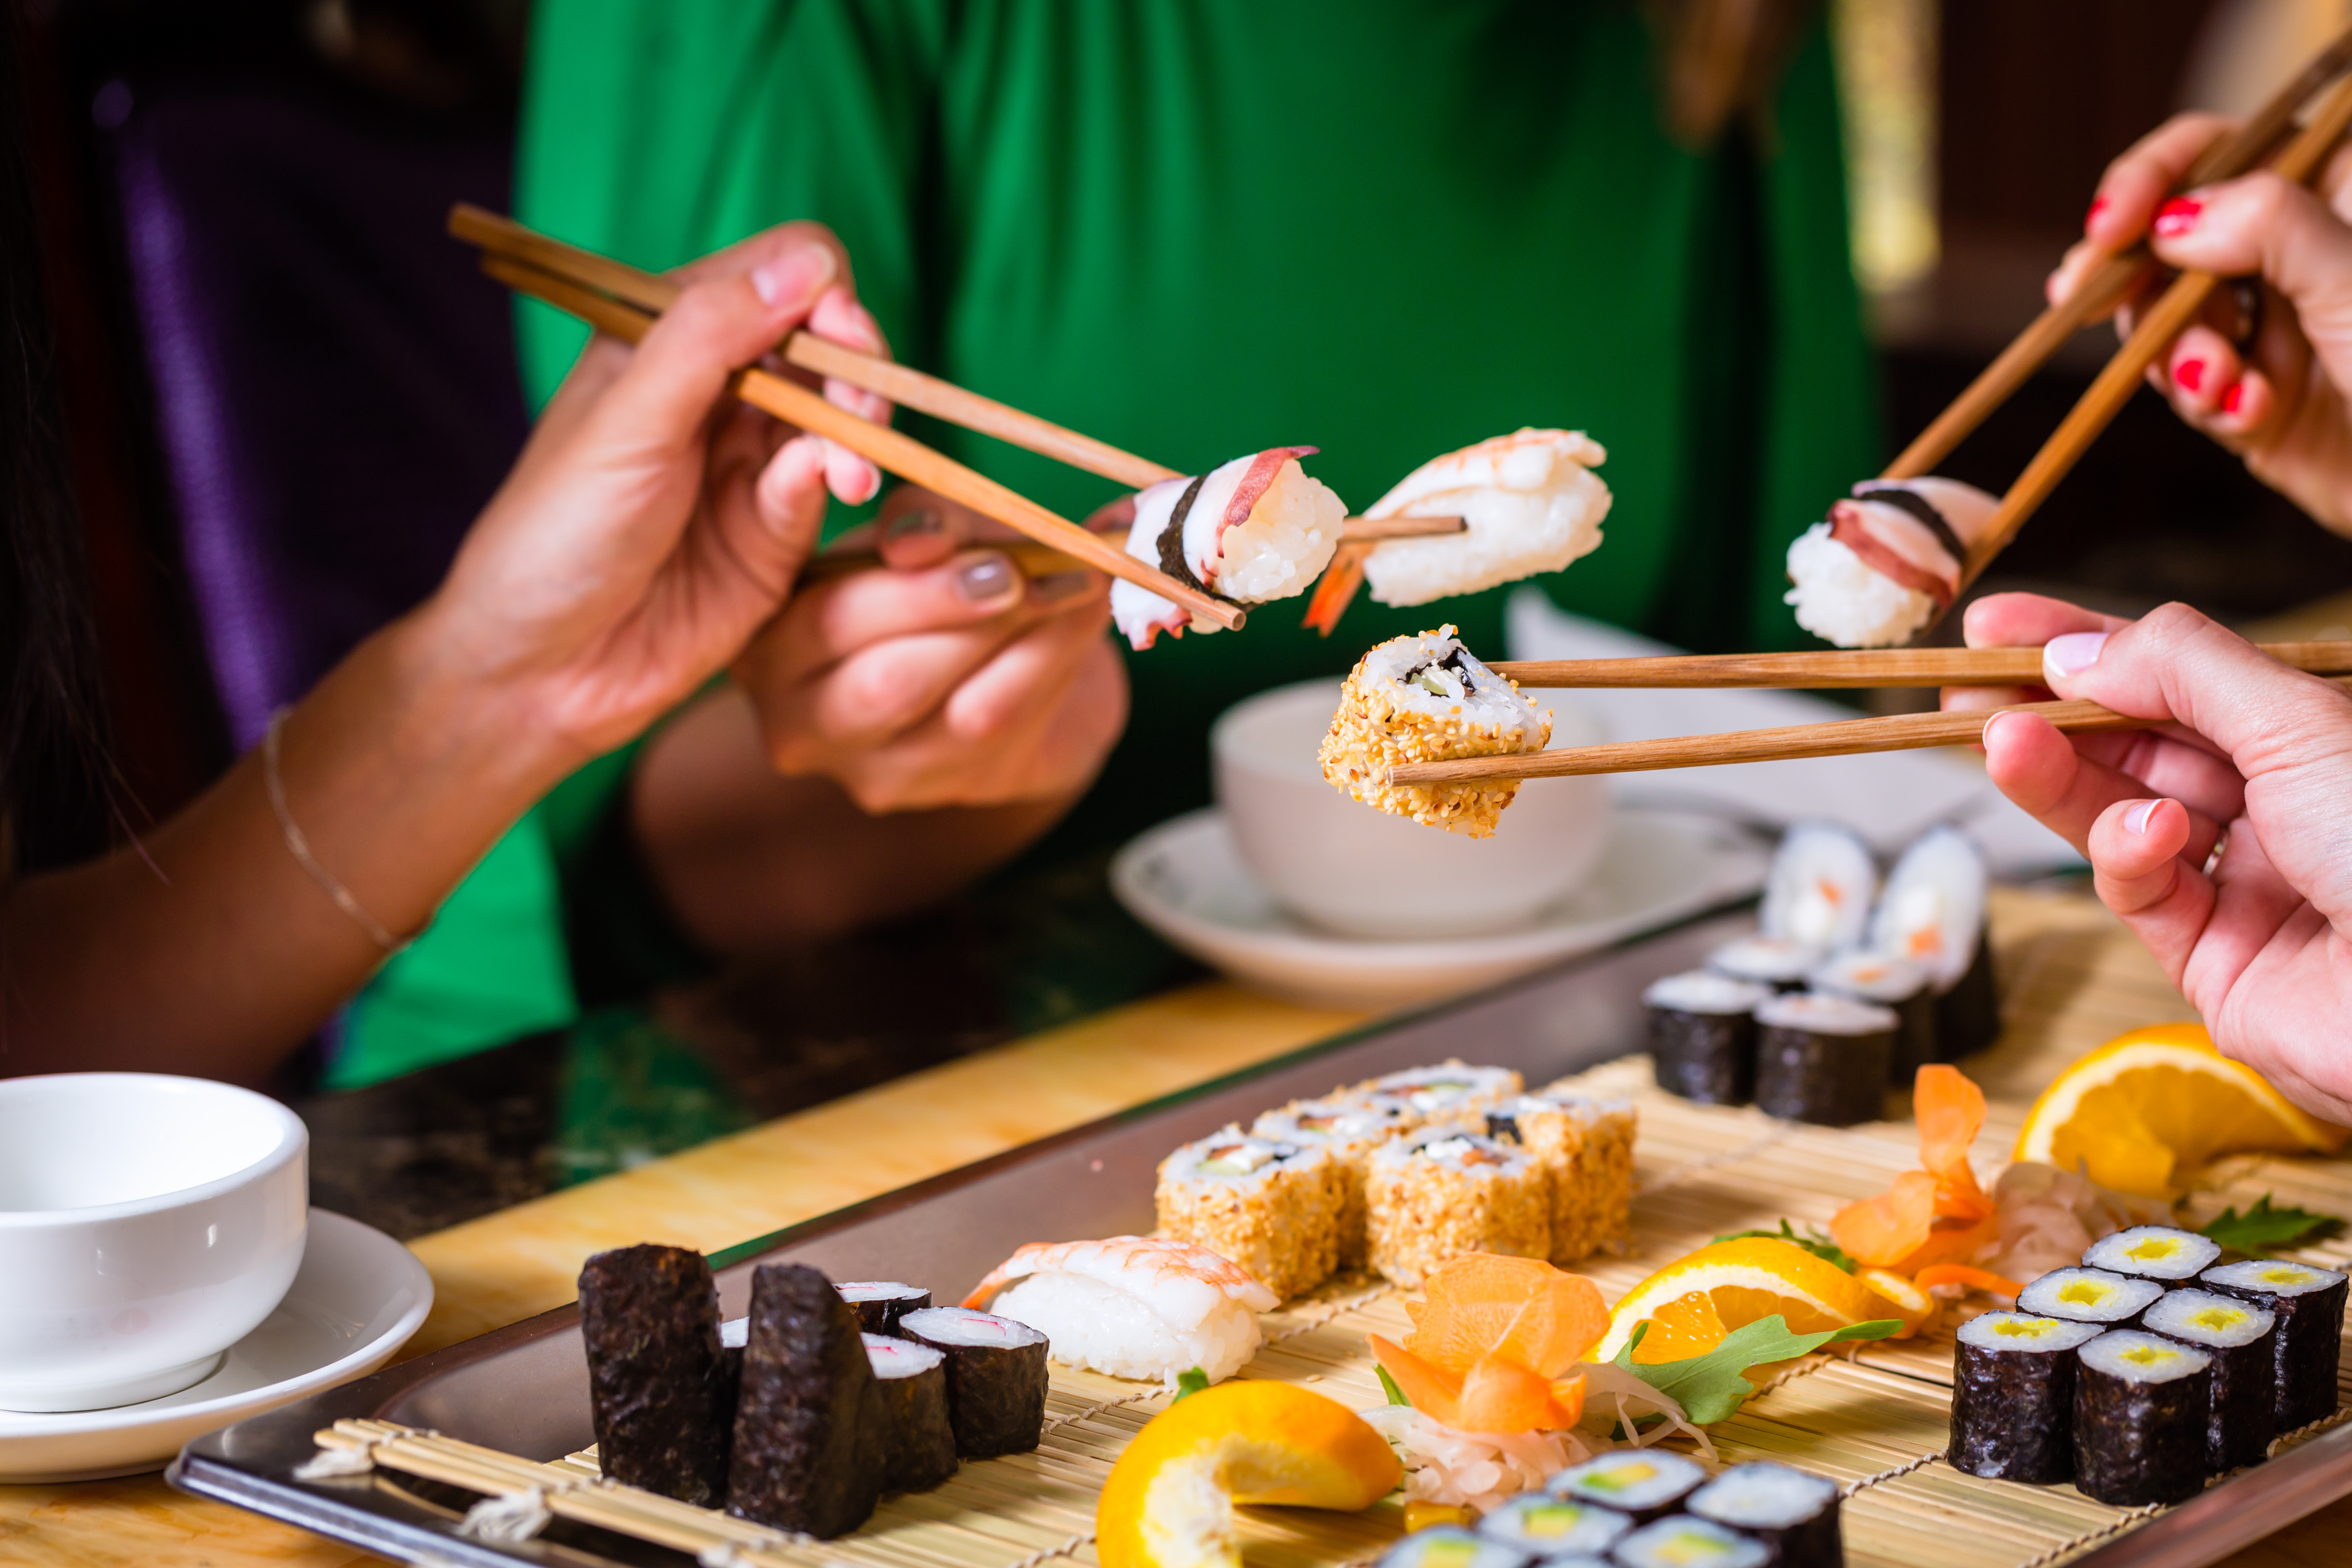 People eating sushi | Source: Shutterstock